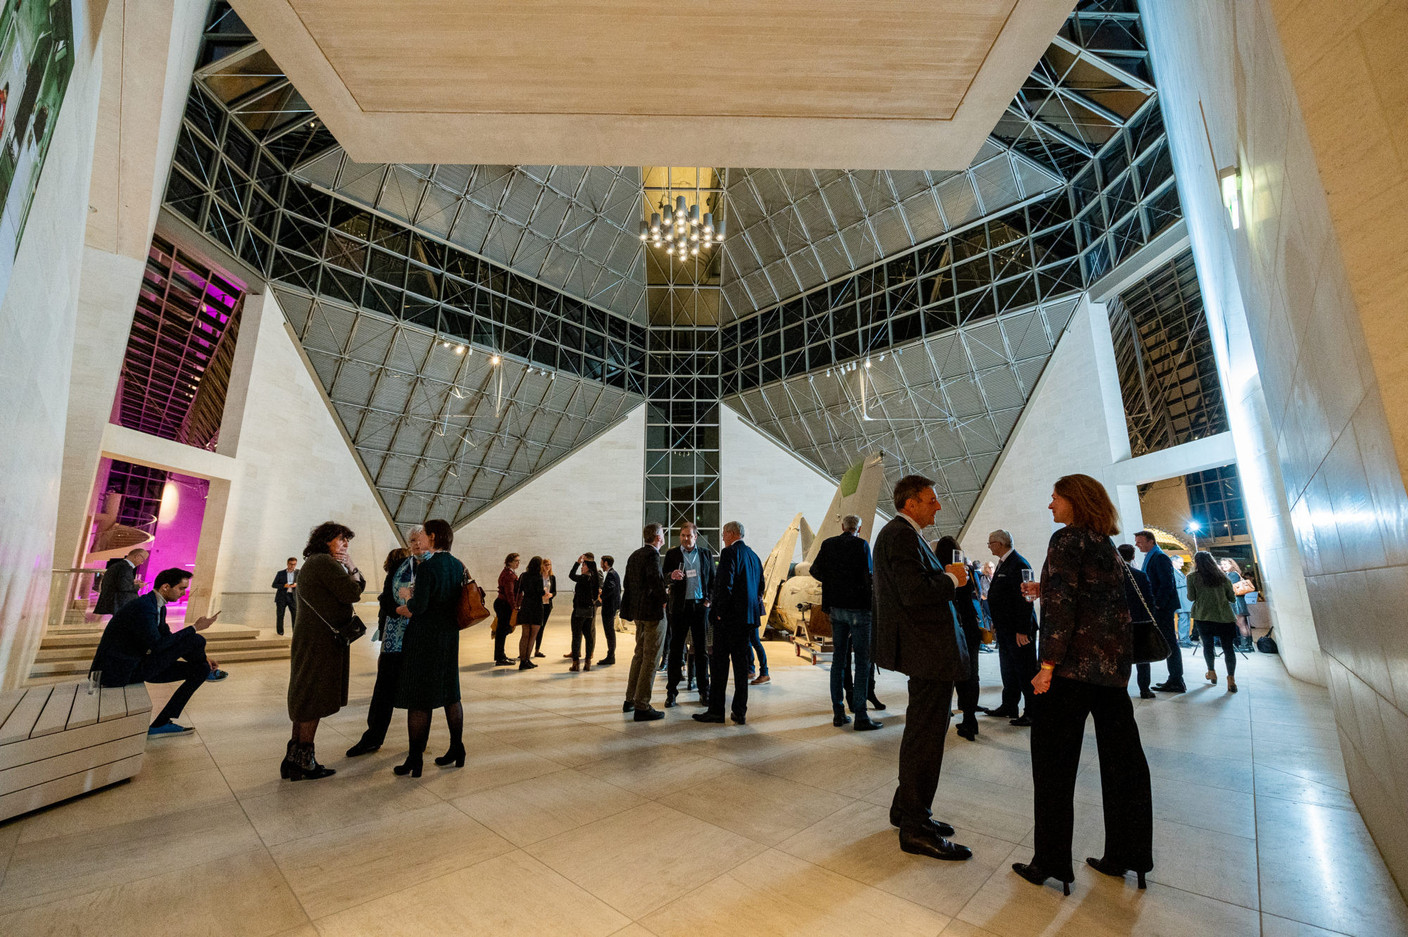 The Presidents' Day took place on Tuesday evening at Mudam. (Photo: Marie De Decker/clc)